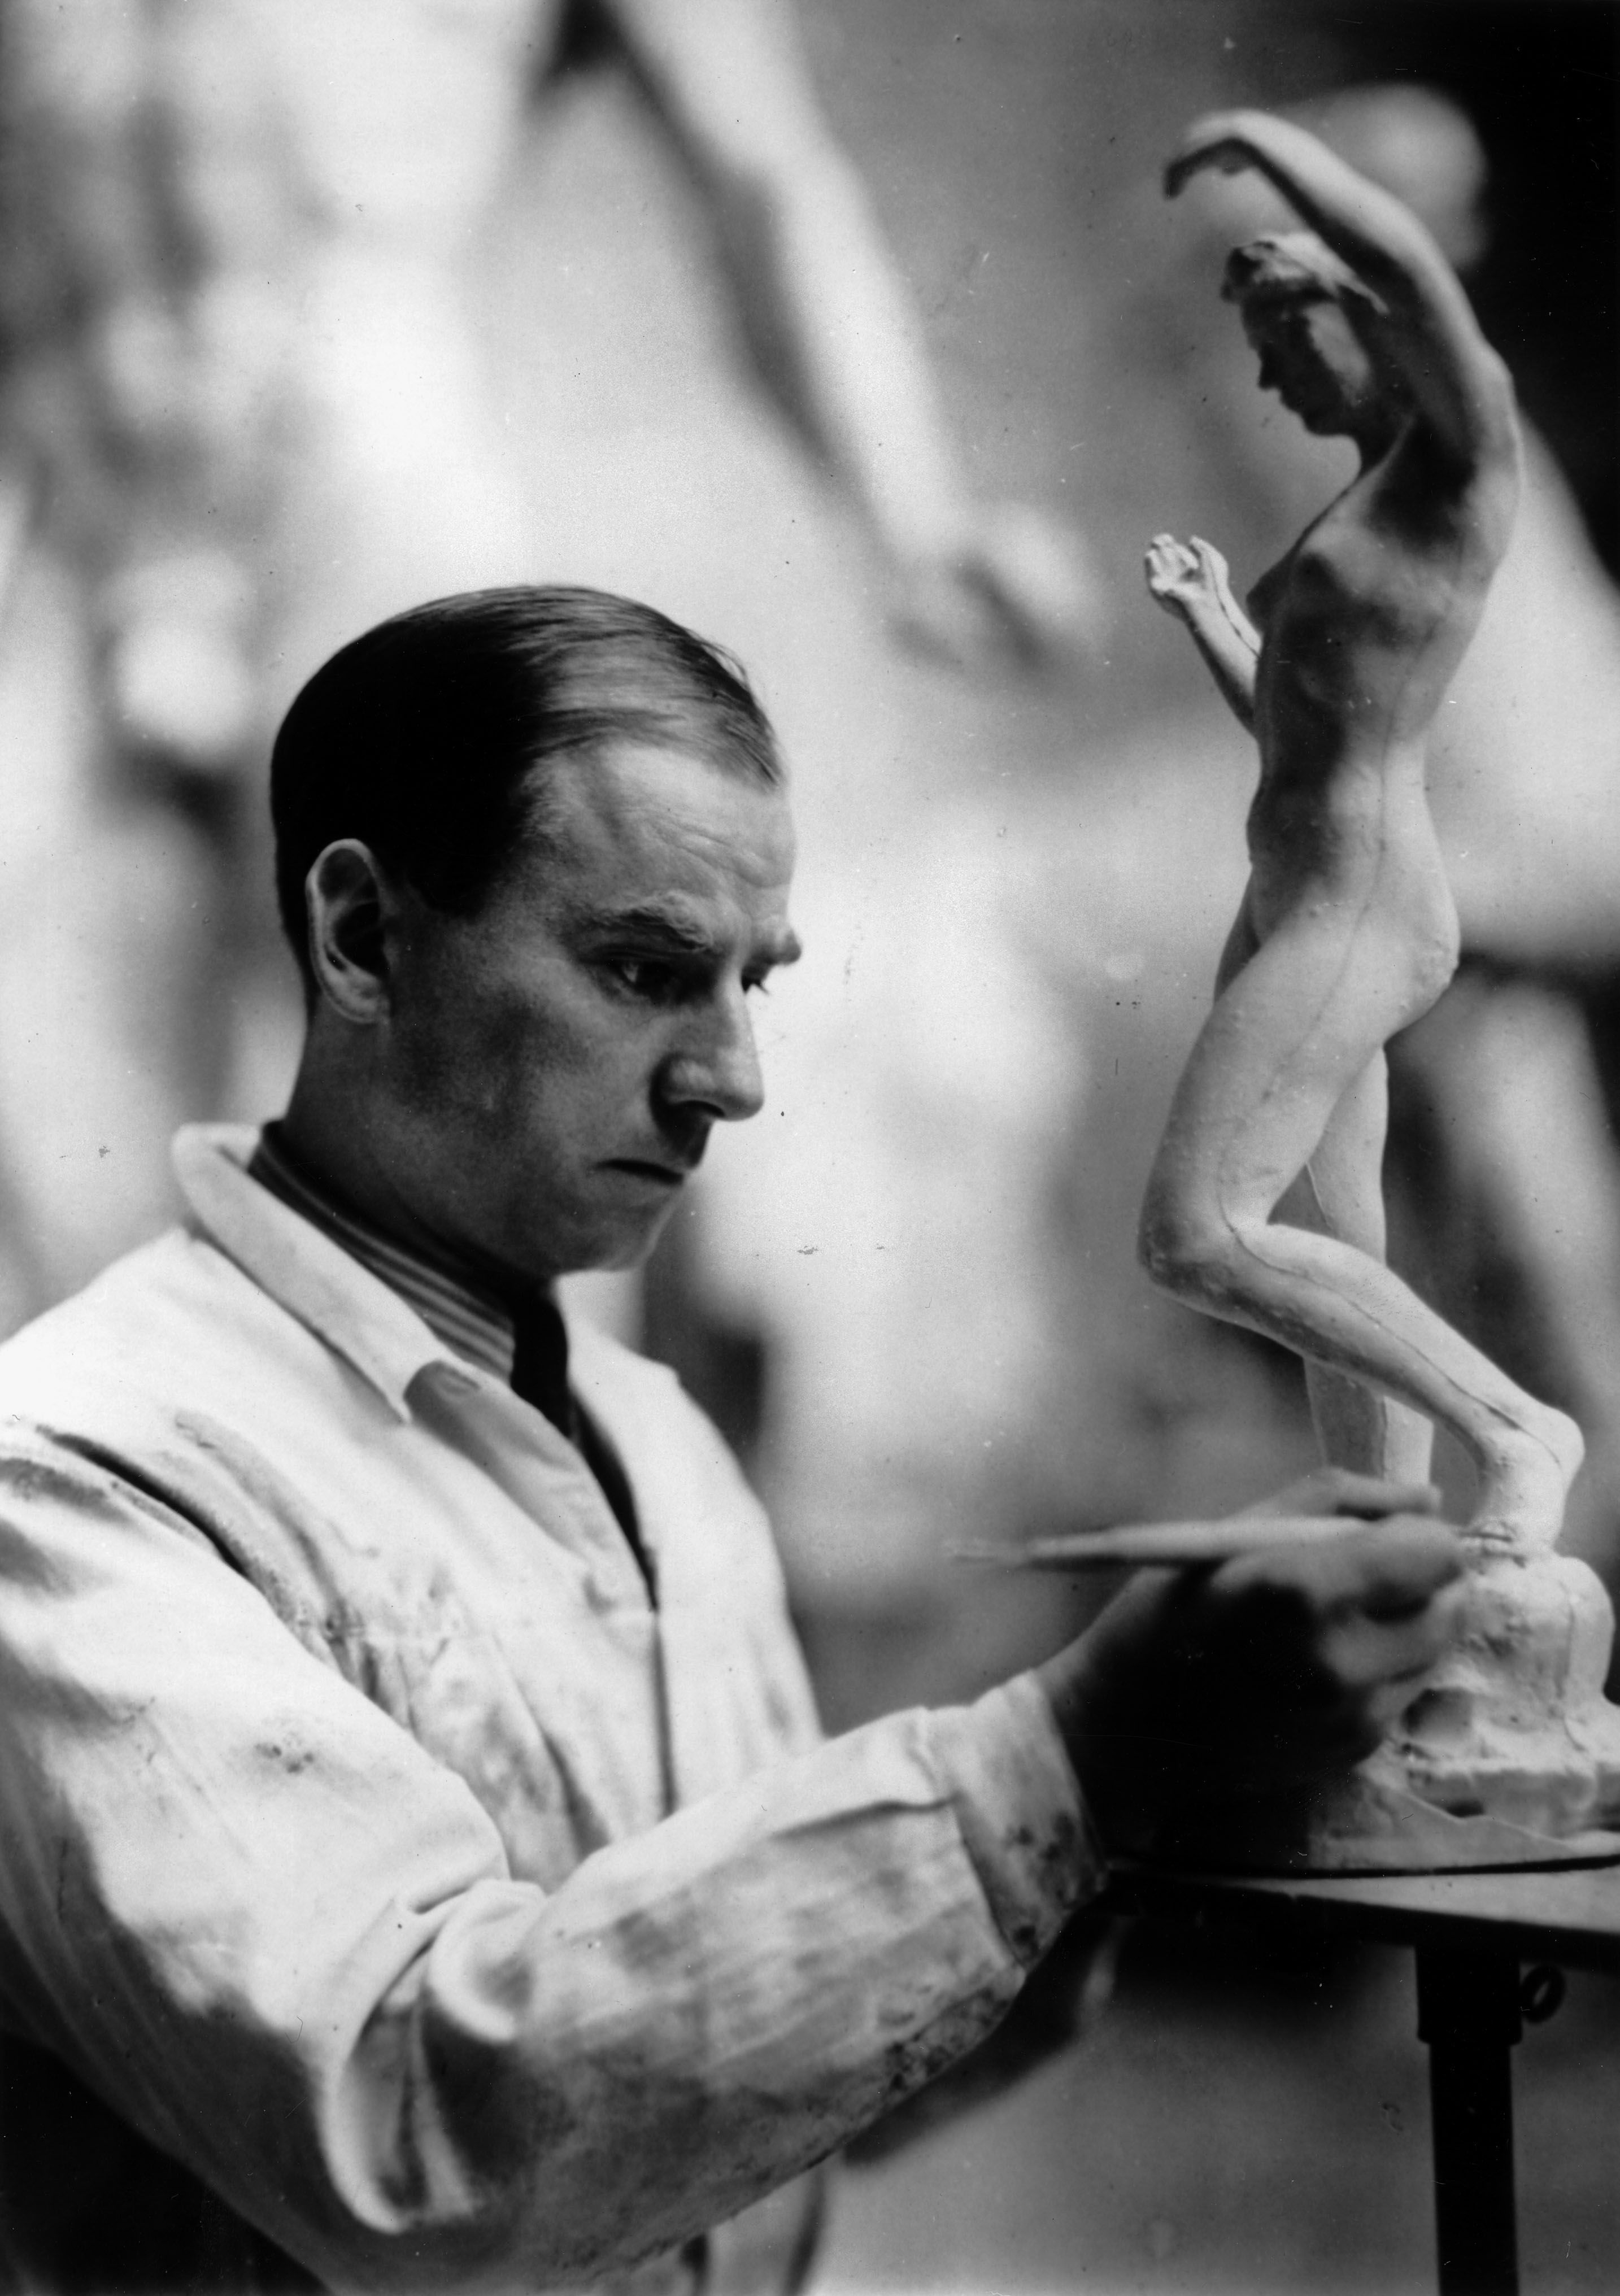 Official state sculptor Arno Breker working on a sculpture in his studio, 1940. AKG611 © akg-images